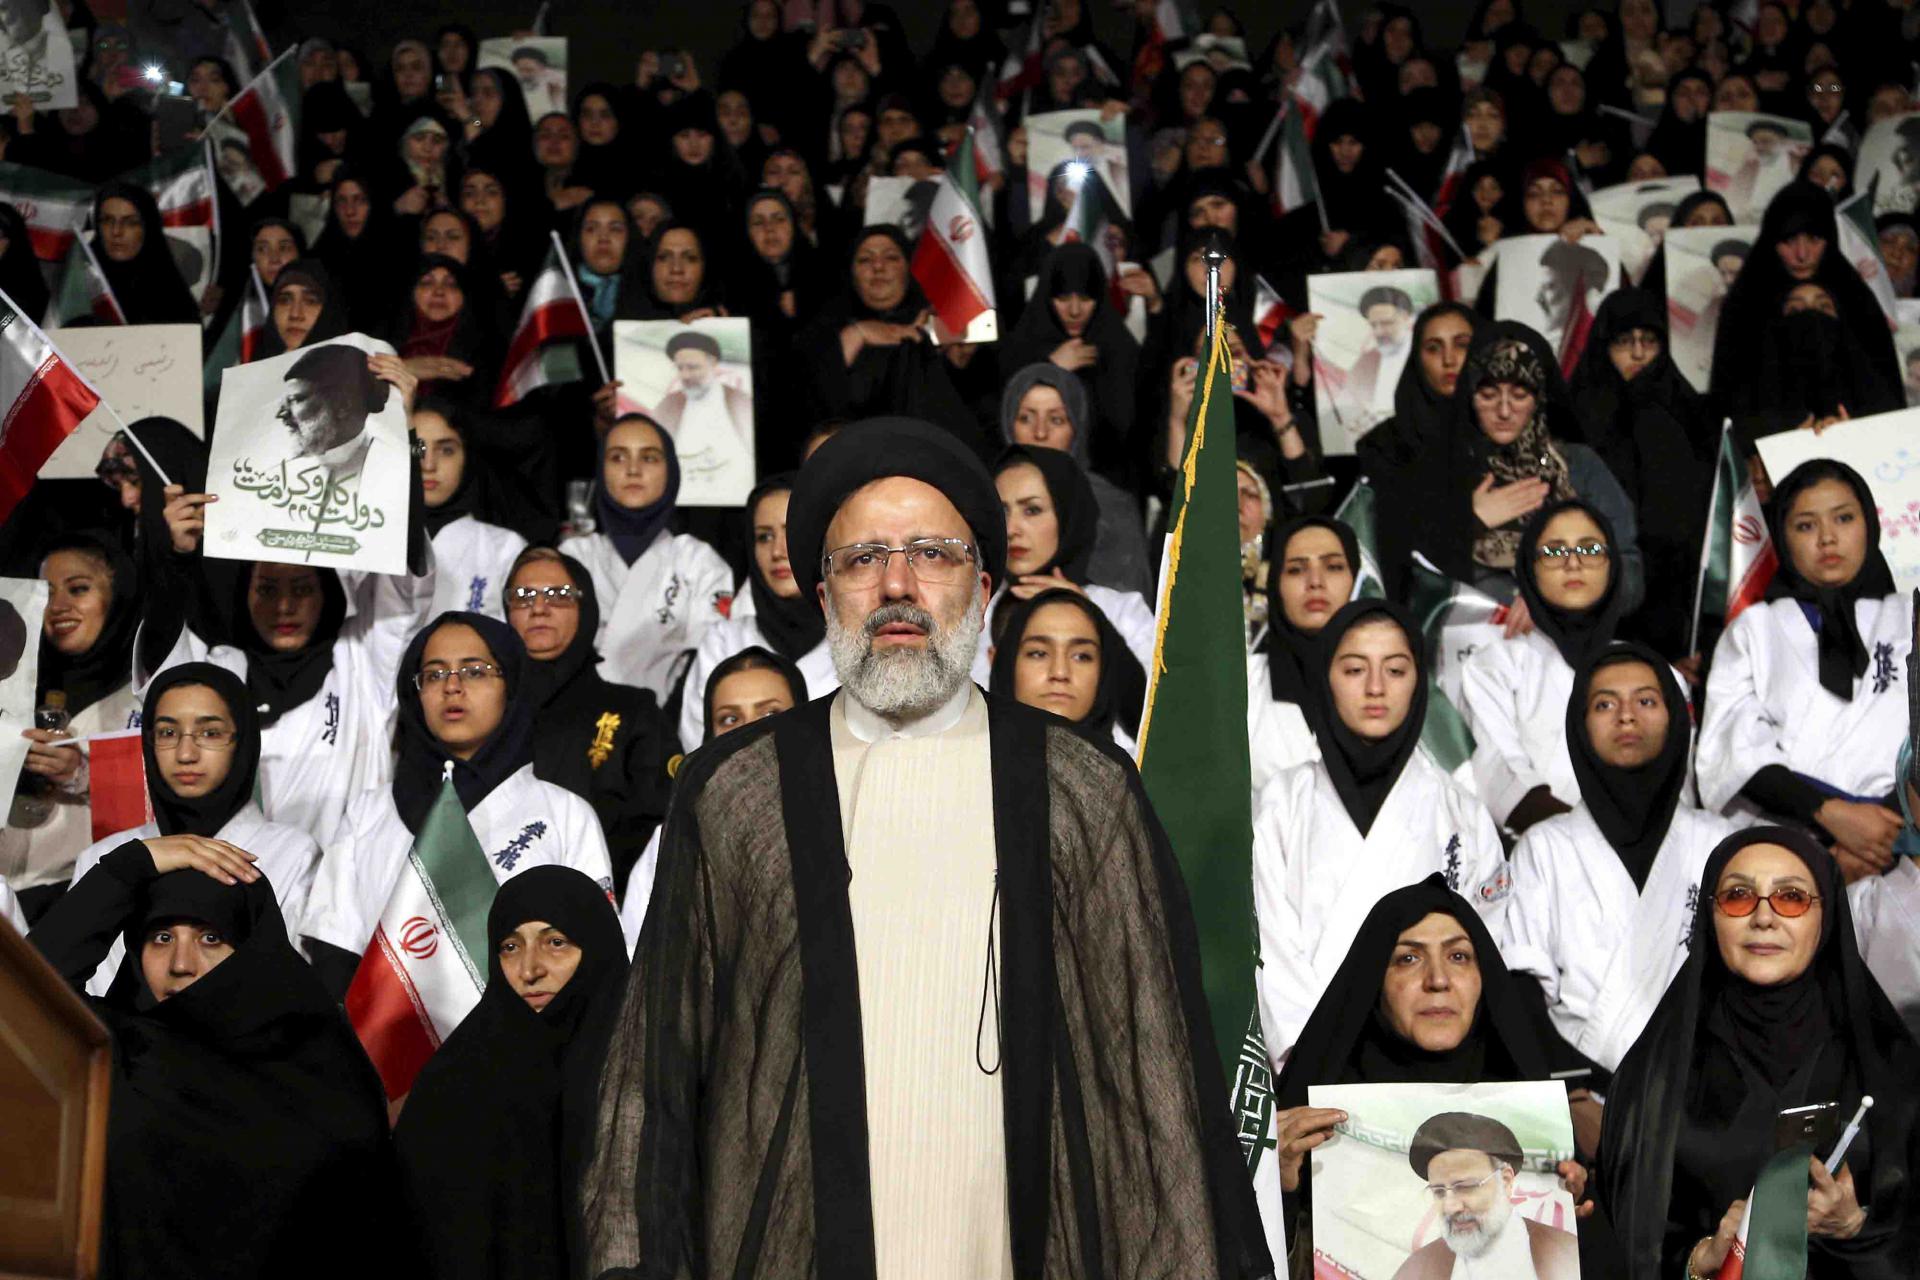 He bears the title of Hojjat al-Islam, which is a rank under Ayatollah in the Shiite cleric hierarchy.